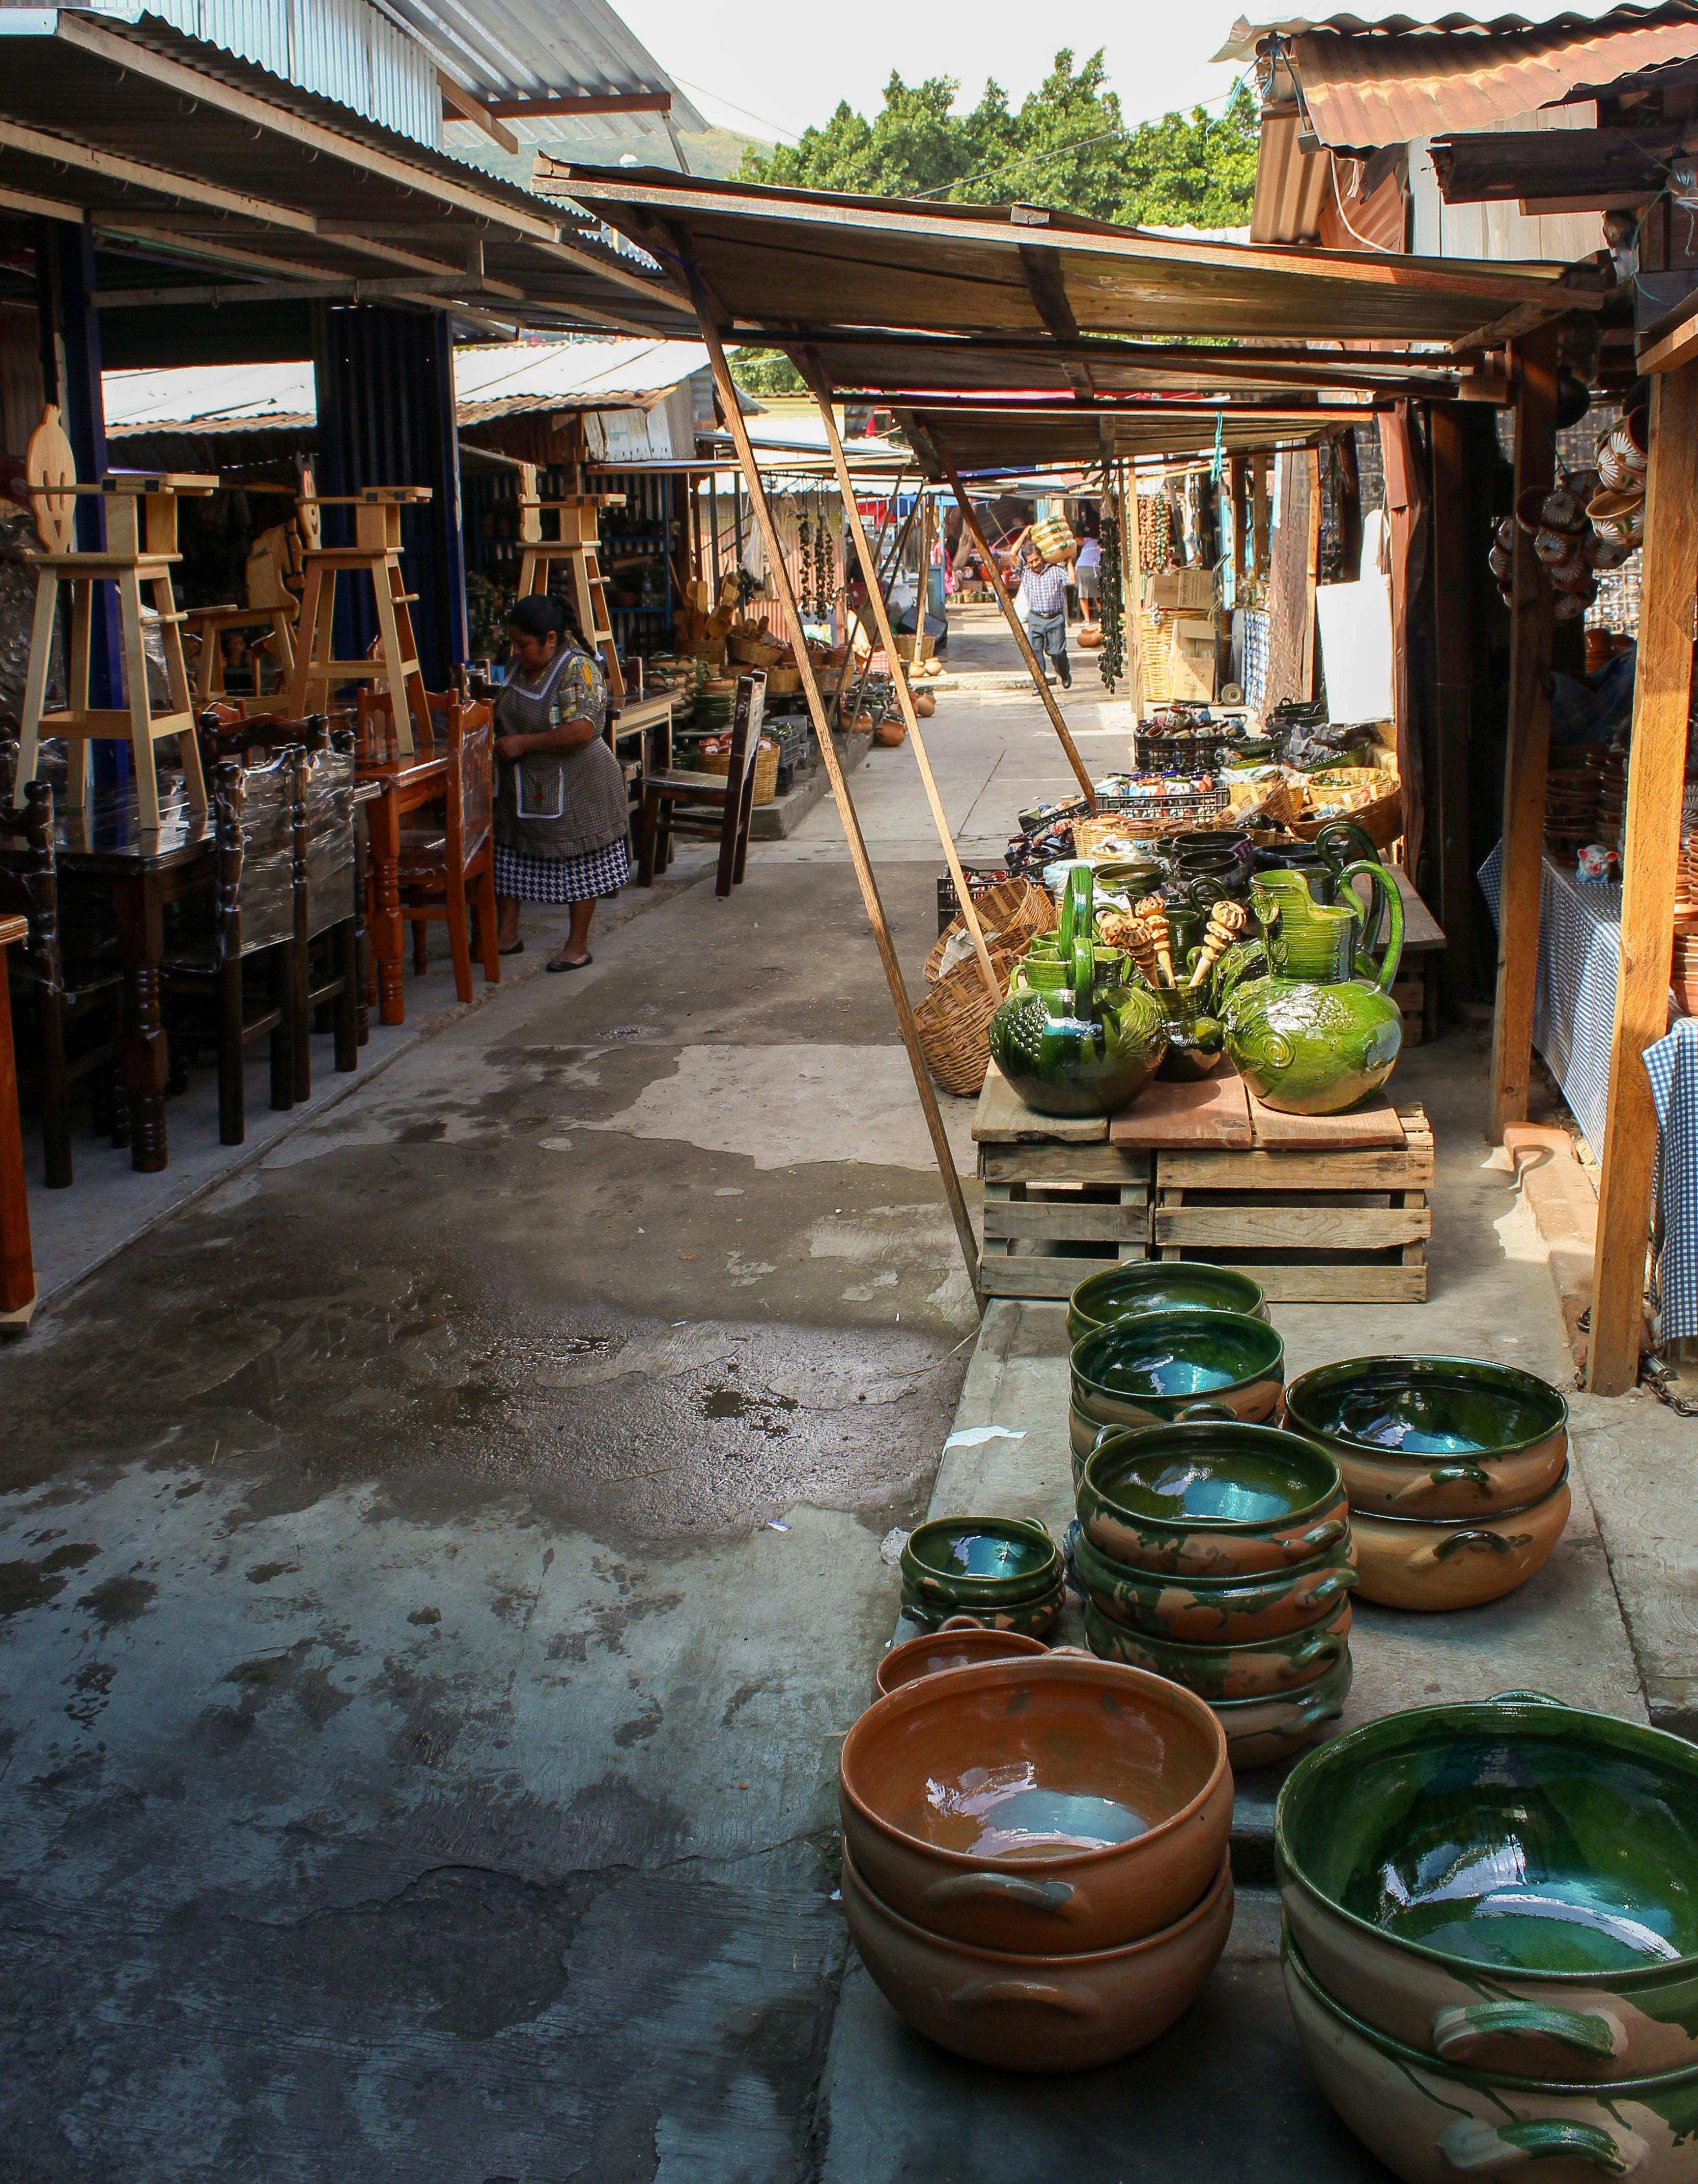 Photo of pottery stalls in the Saturday Abastos market in Oaxaca, Mexico